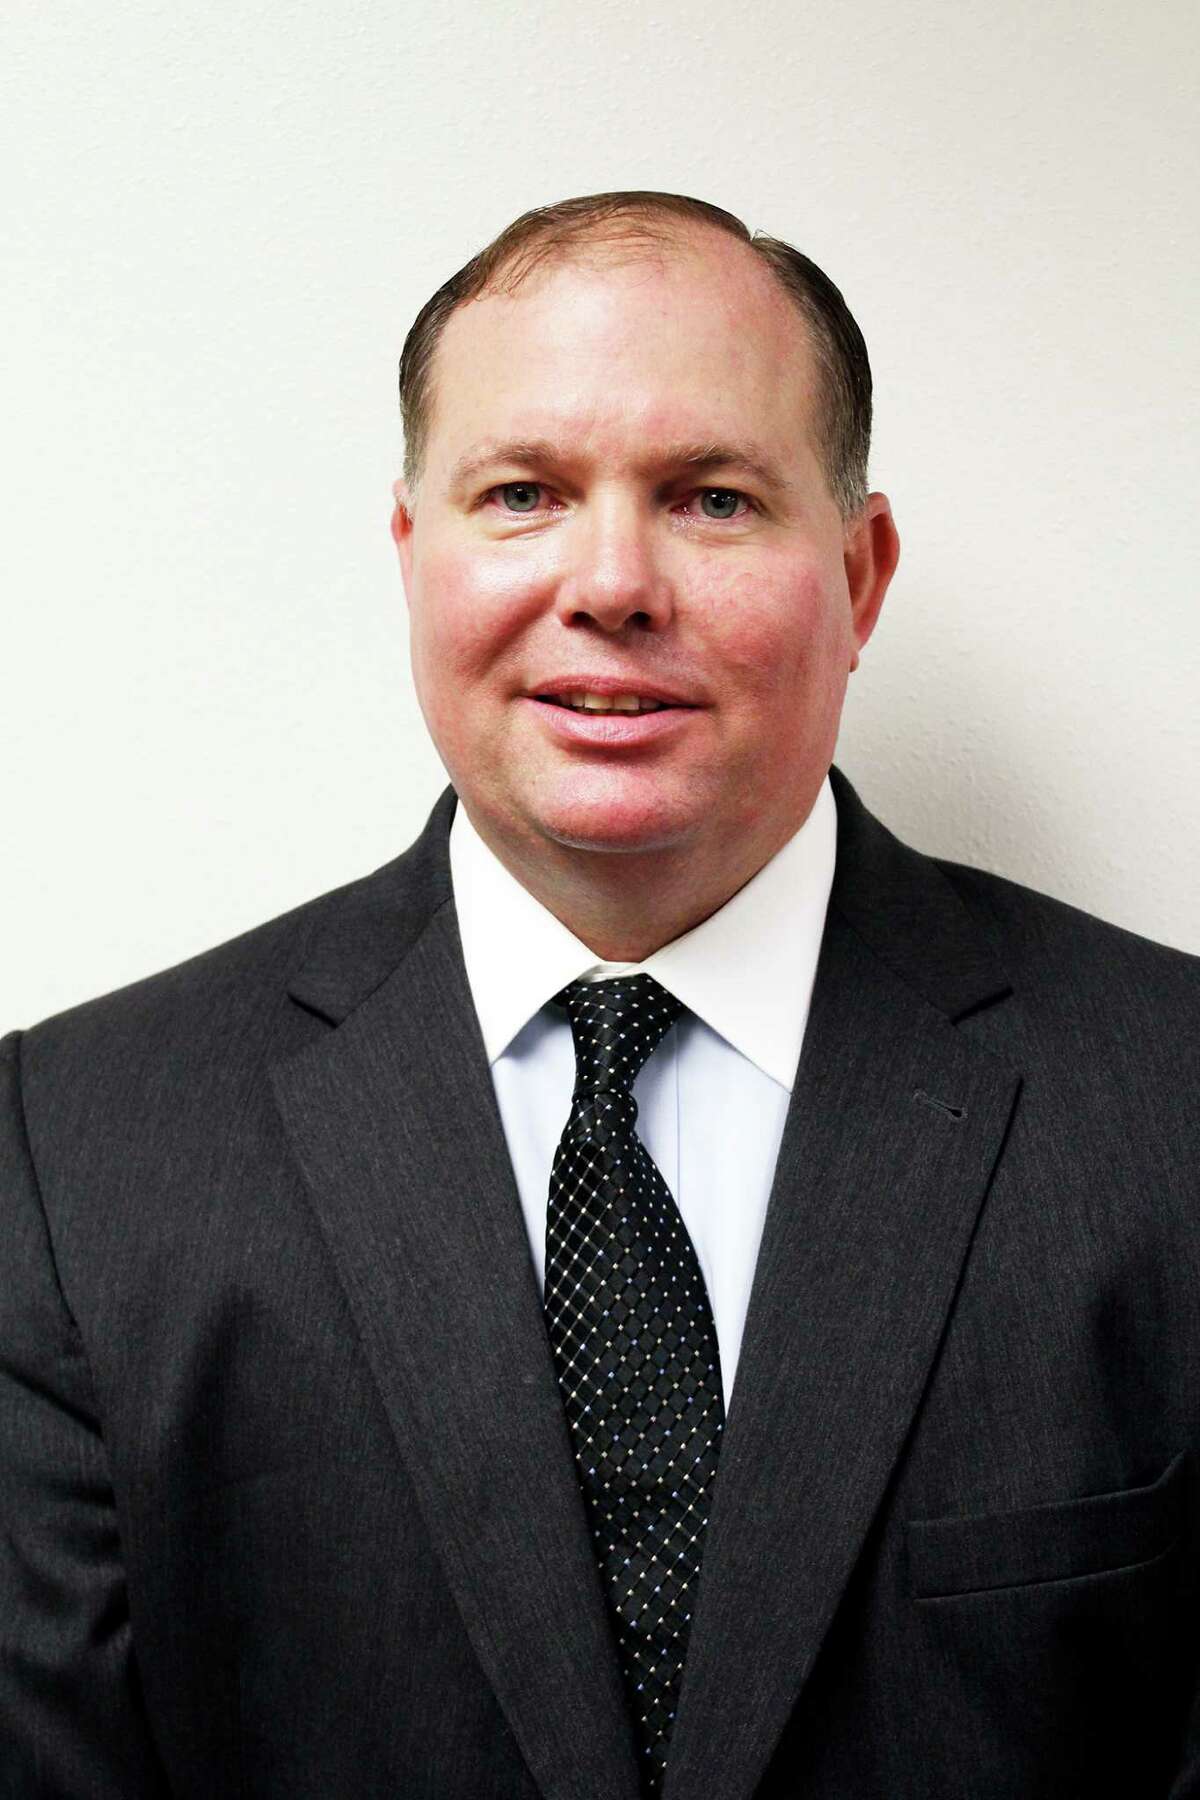 Stetson Roane is the Seguin ISD superintendent of schools.